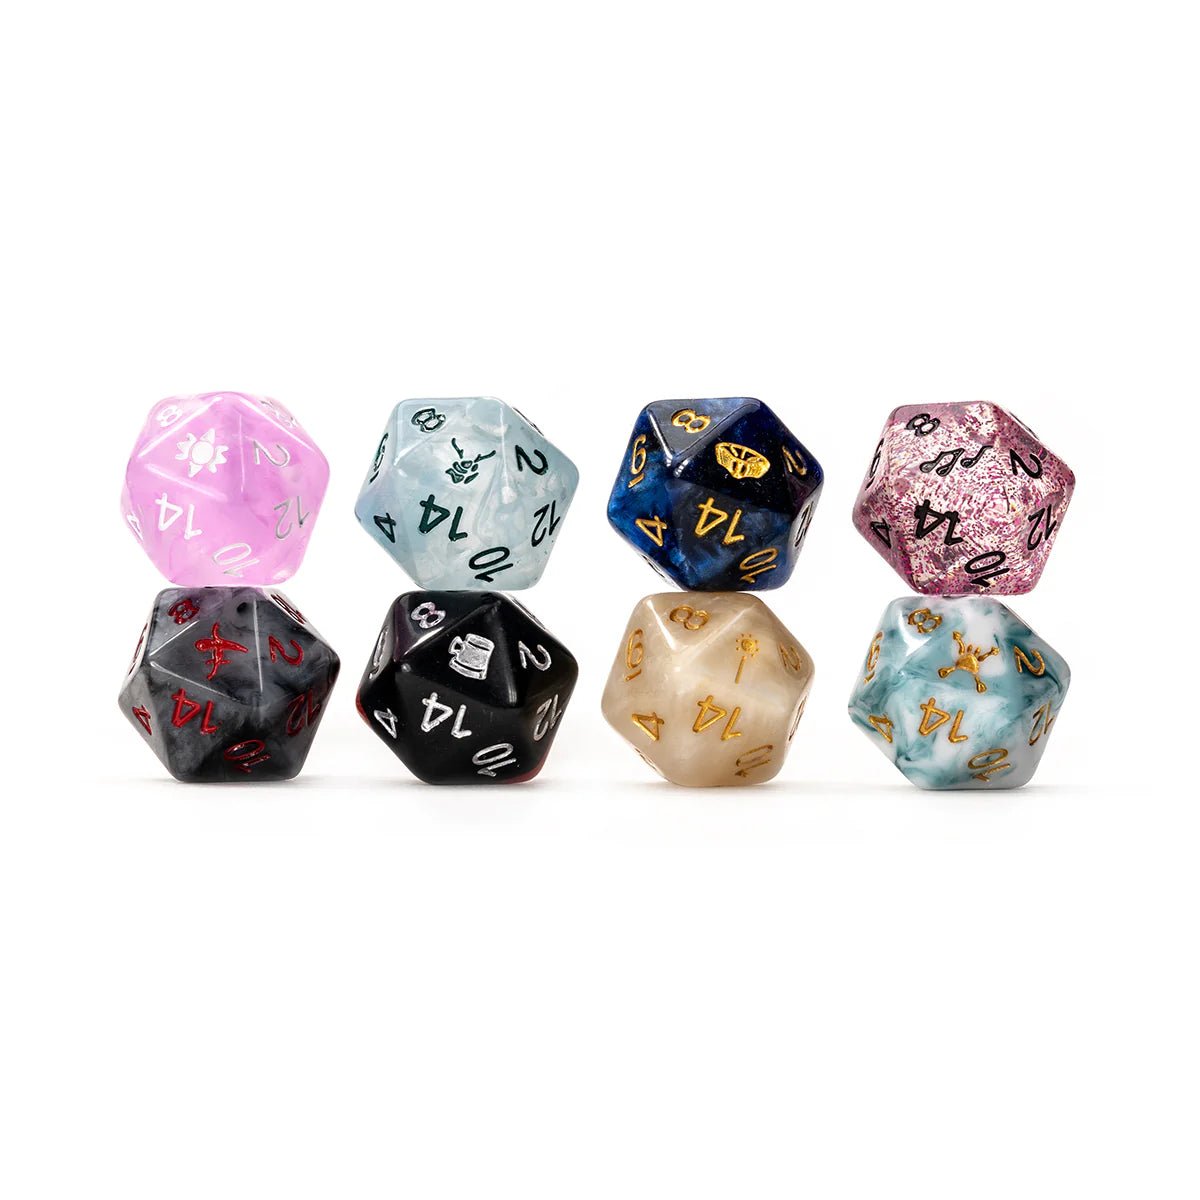 Vox Machina d20 Dice Set (8d20 with Bag) - The Fourth Place